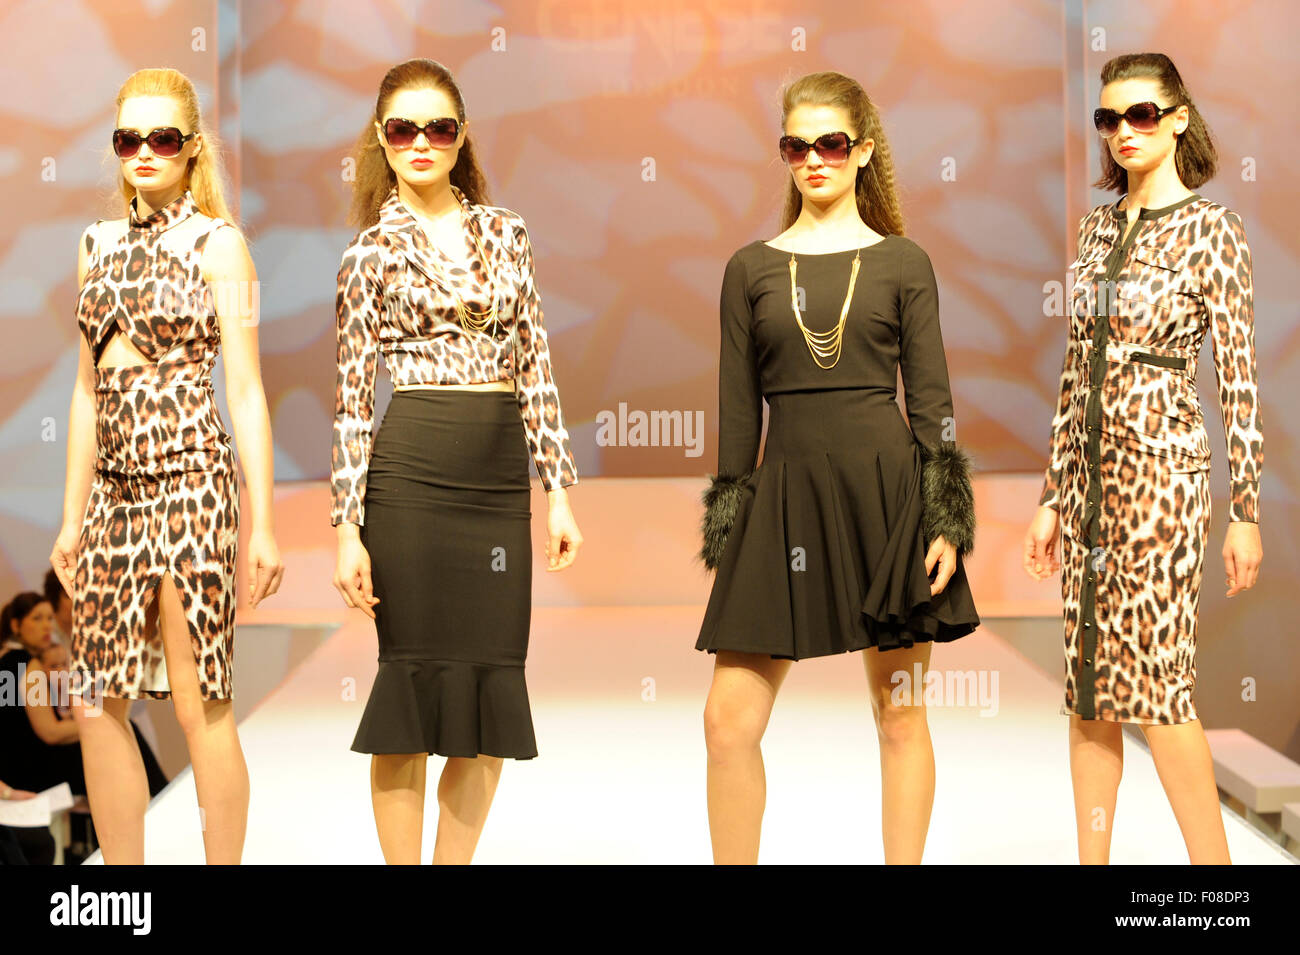 Models on the Spring Summer 2016 Fashion Catwalk. Moda Spring Summer 2016, one of the country's premier trade fashion shows for fashion buyers, took place at the NEC, Birmingham, UK, 9th-11th August 2015. Credit:  Antony Nettle/Alamy Live News Stock Photo